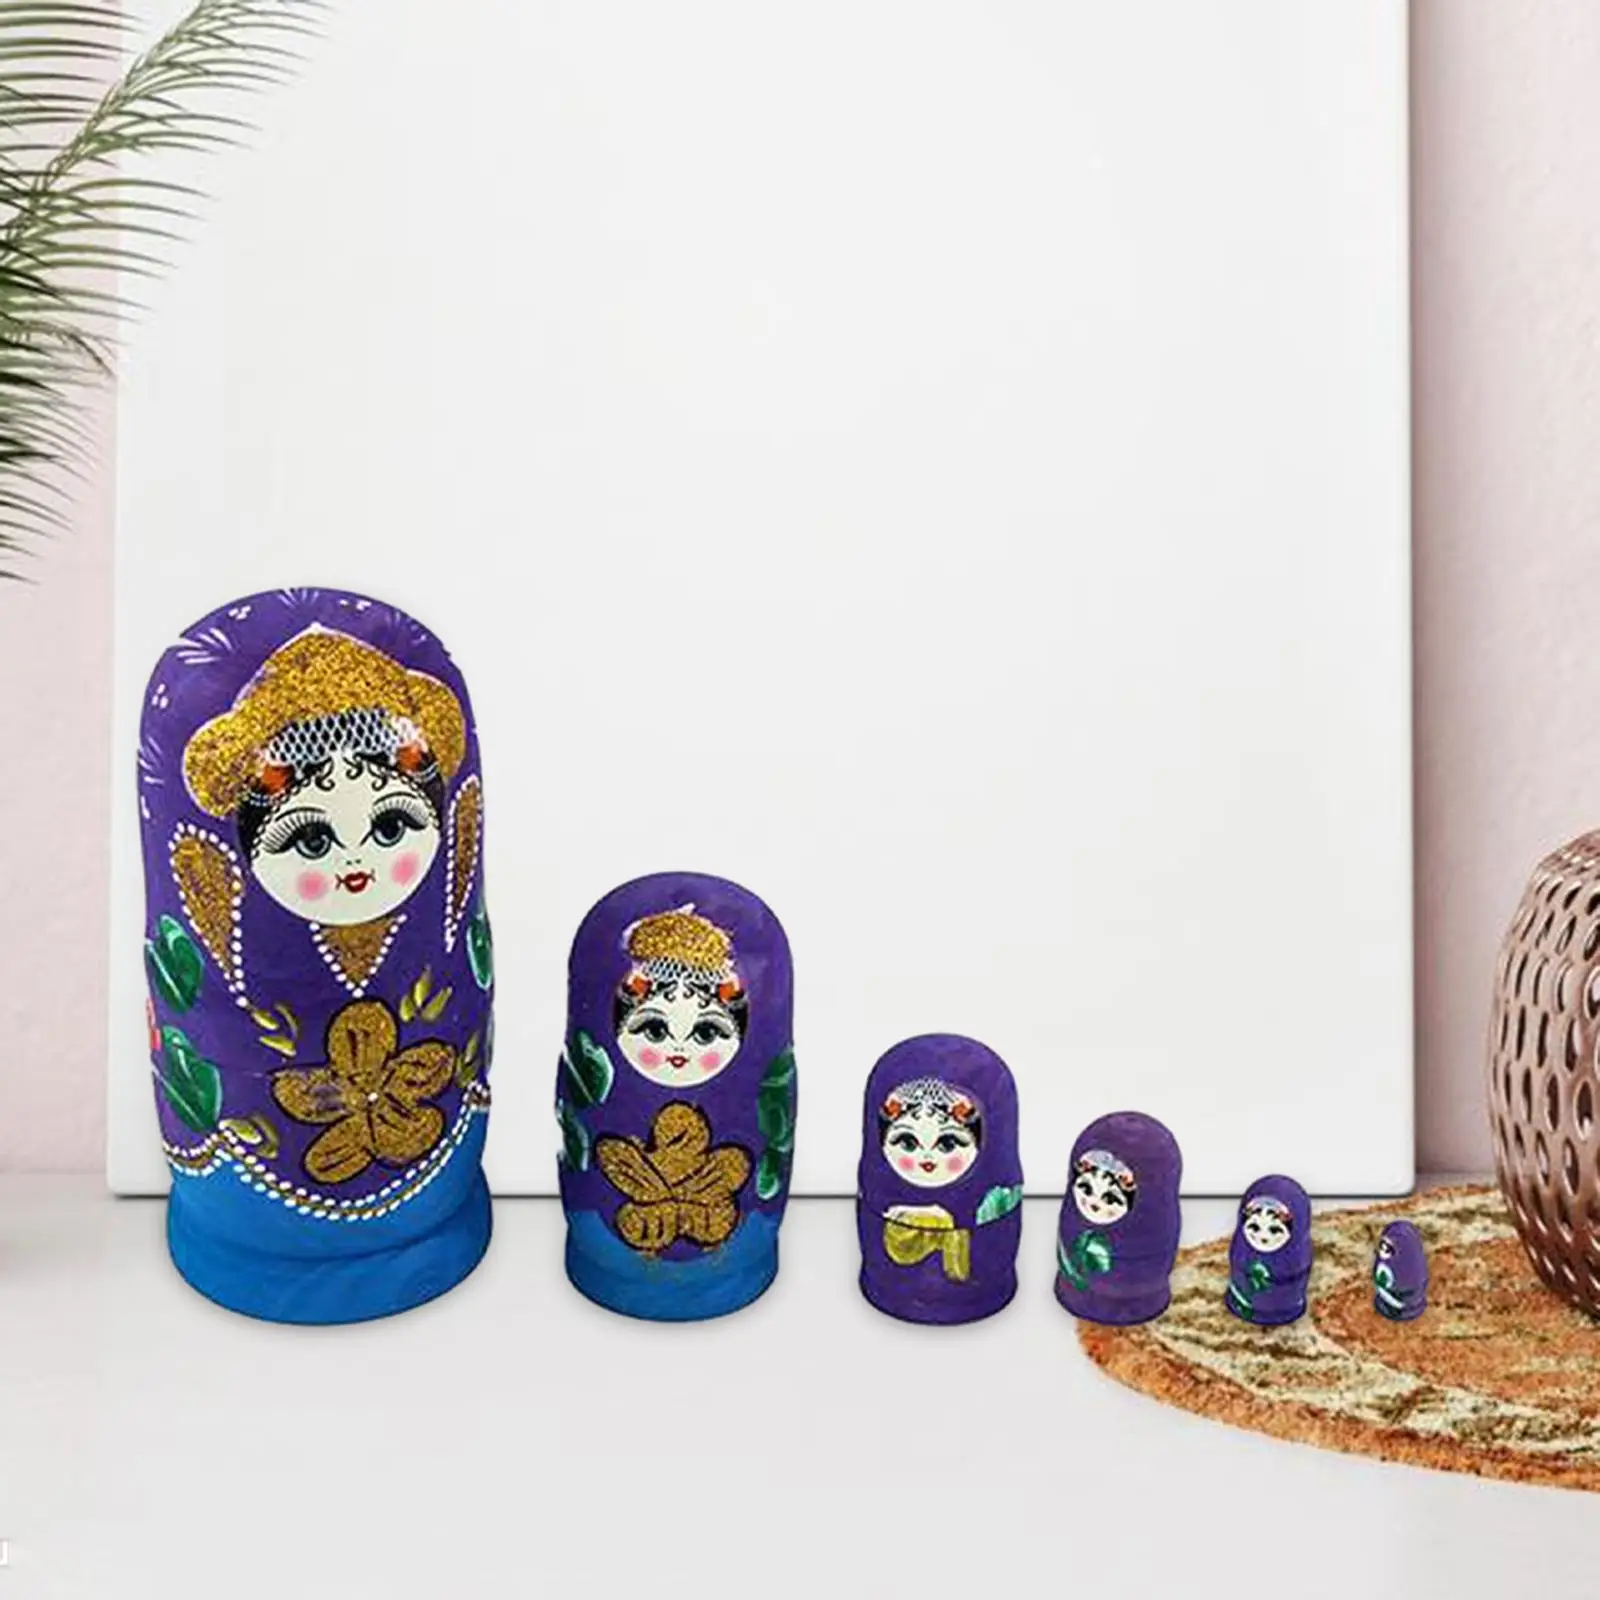 7 Pieces Russian Nesting Doll Matryoshka Dolls Hand Painted Traditional Wood Stacking Nested Set for Birthday Gift Table Kids